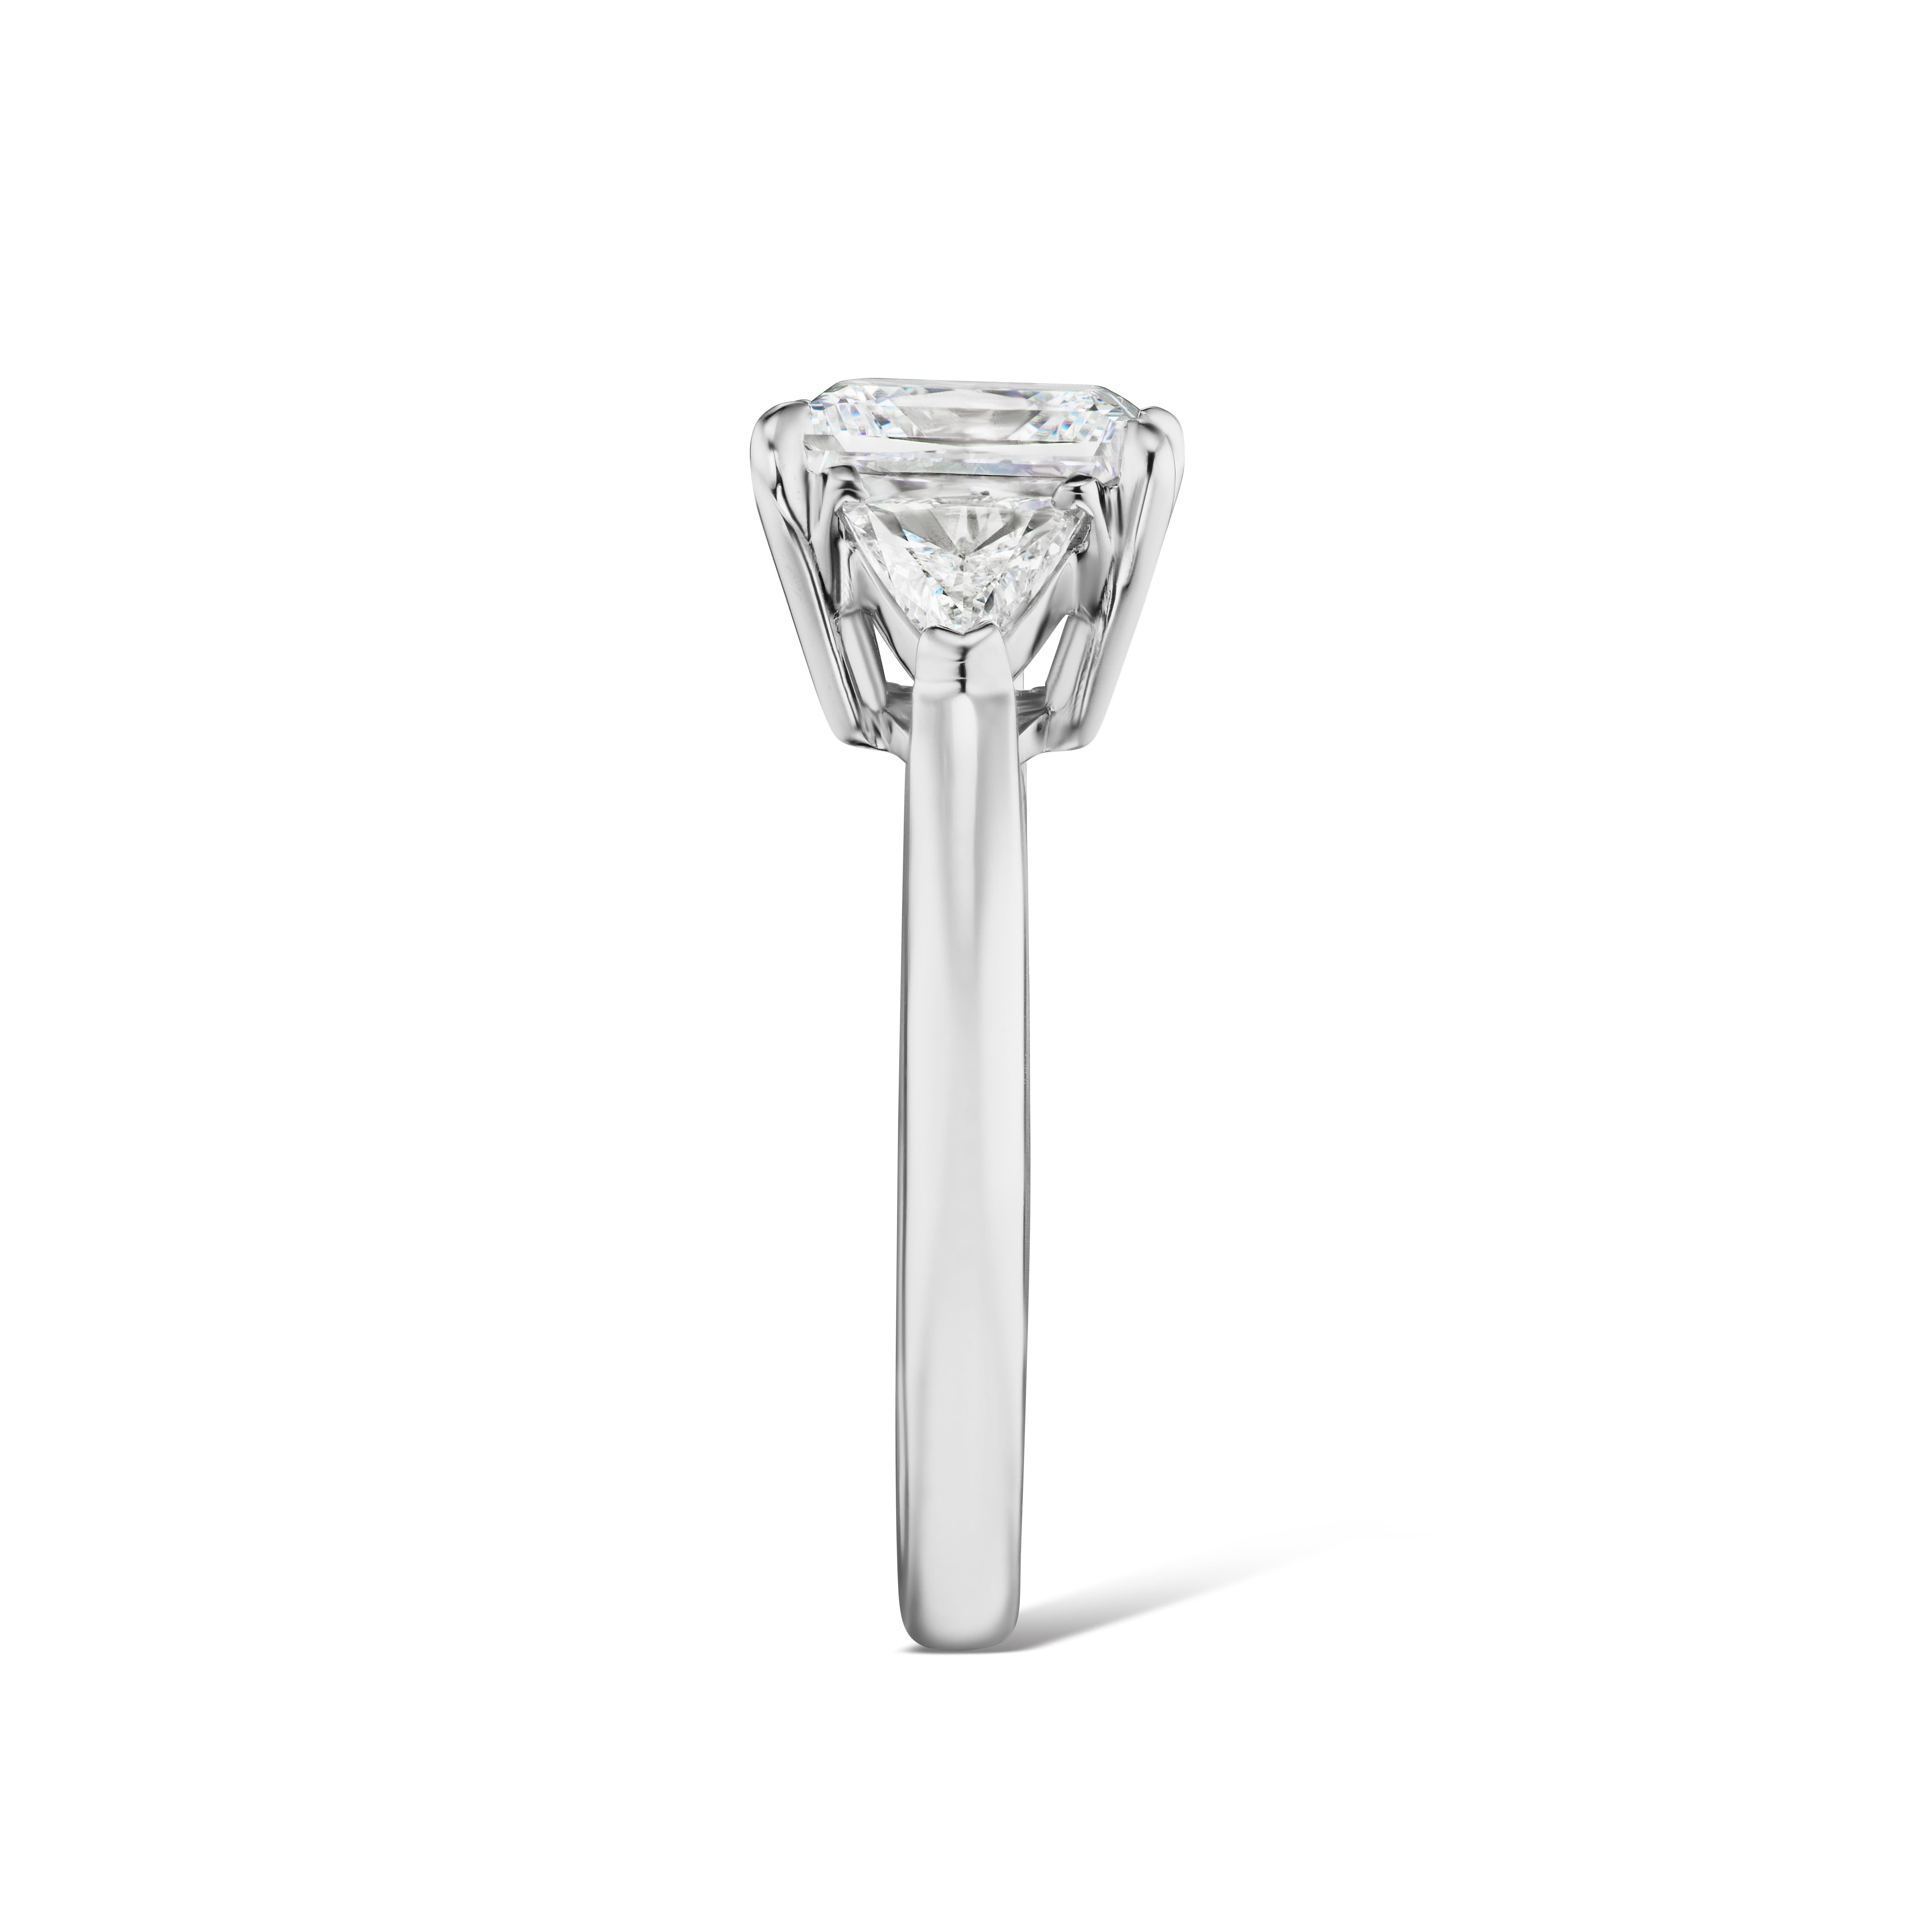 This stunning 2.50 DSI1 GIA Certified stone is enriched by a pair of .57 ct. total weight of matching Trillion Cut side stones in a elegant Platinum ring. It is a size 8 and can easily be sized.  If you don't see something, say something! We would